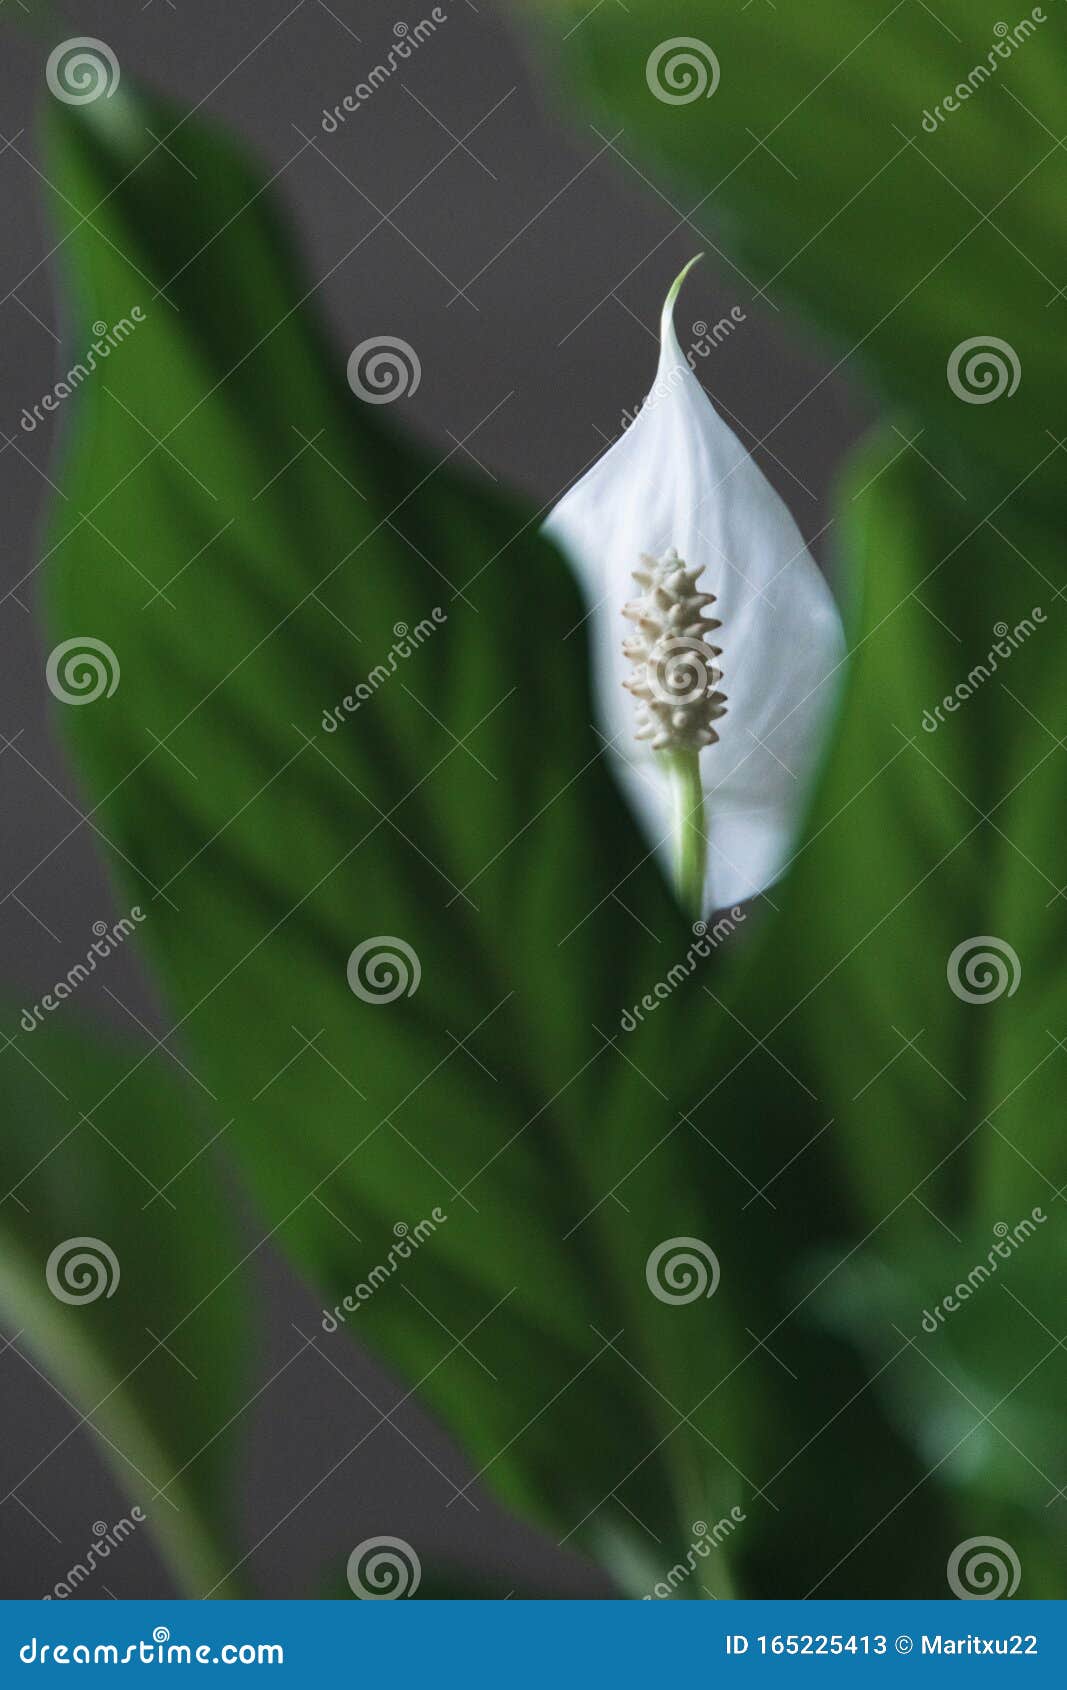 peace lily flower and foliage.